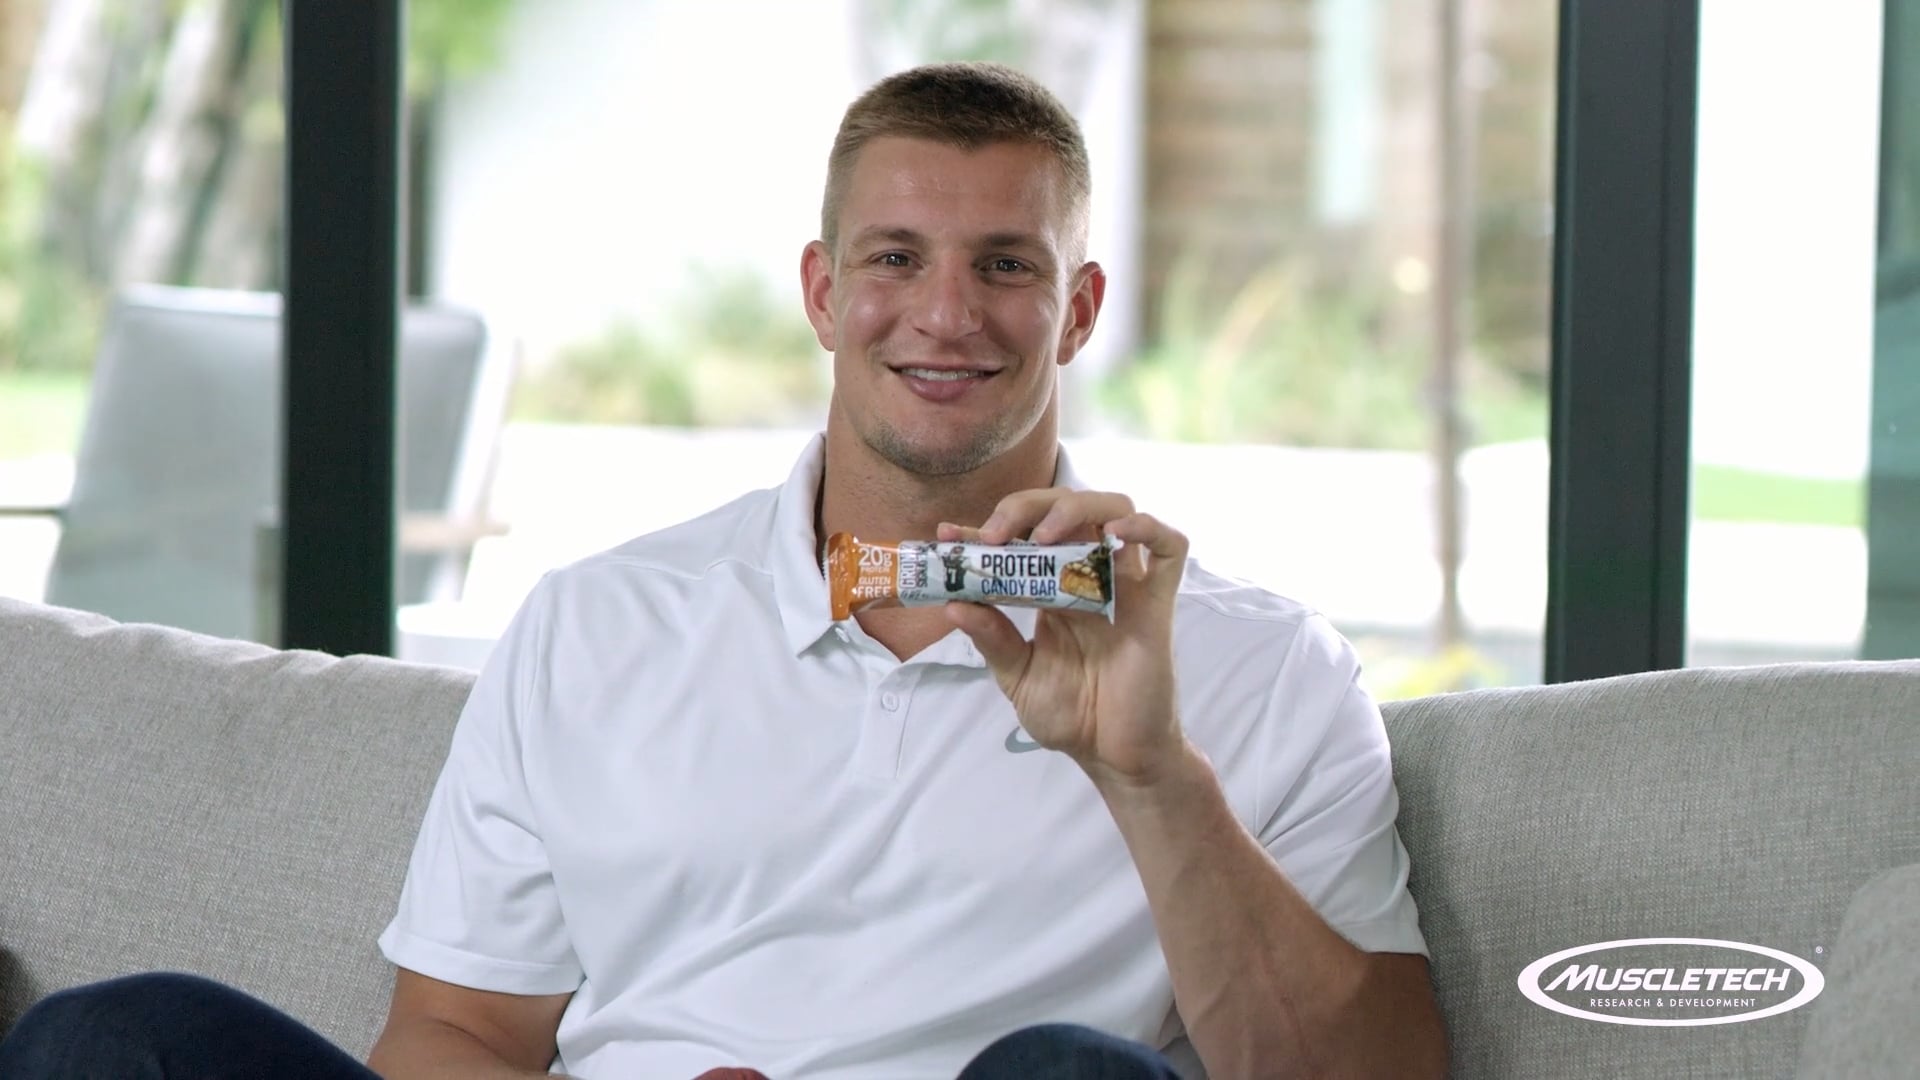  GRONK PROTEIN BAR Gronk Awesome! 